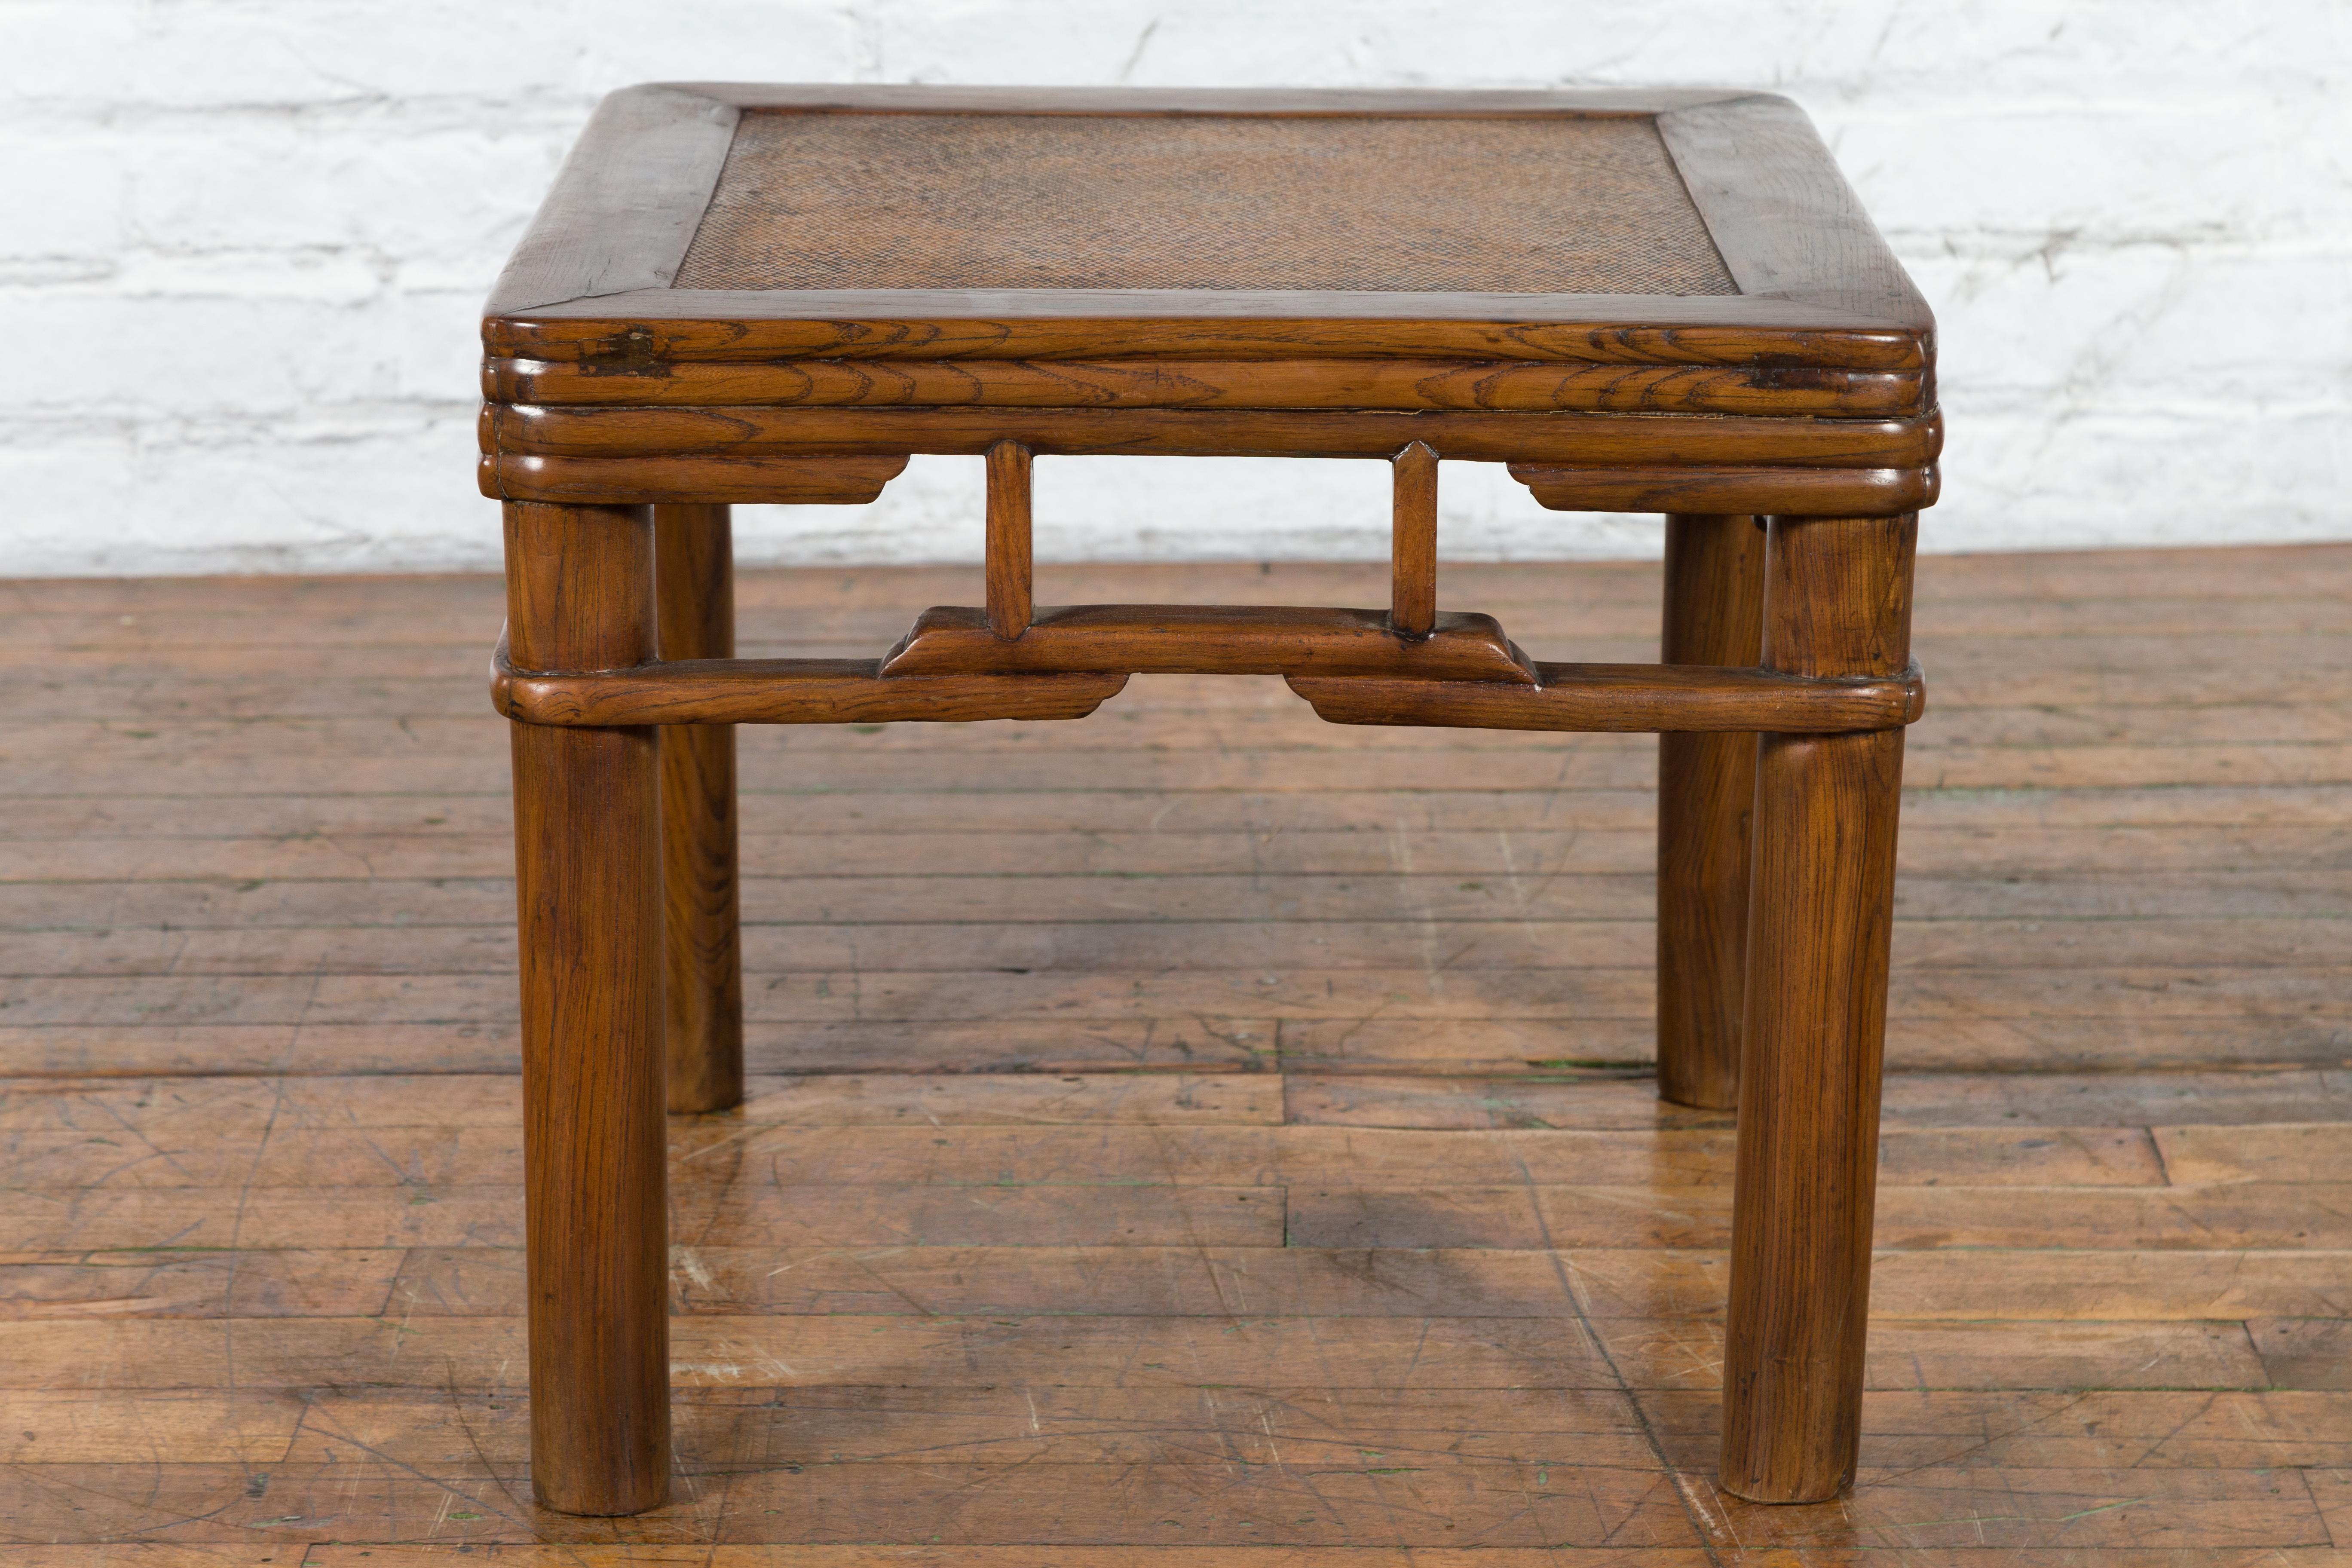 Chinese Qing Dynasty Early 20th Century Elmwood Side Table with Woven Rattan Top For Sale 2